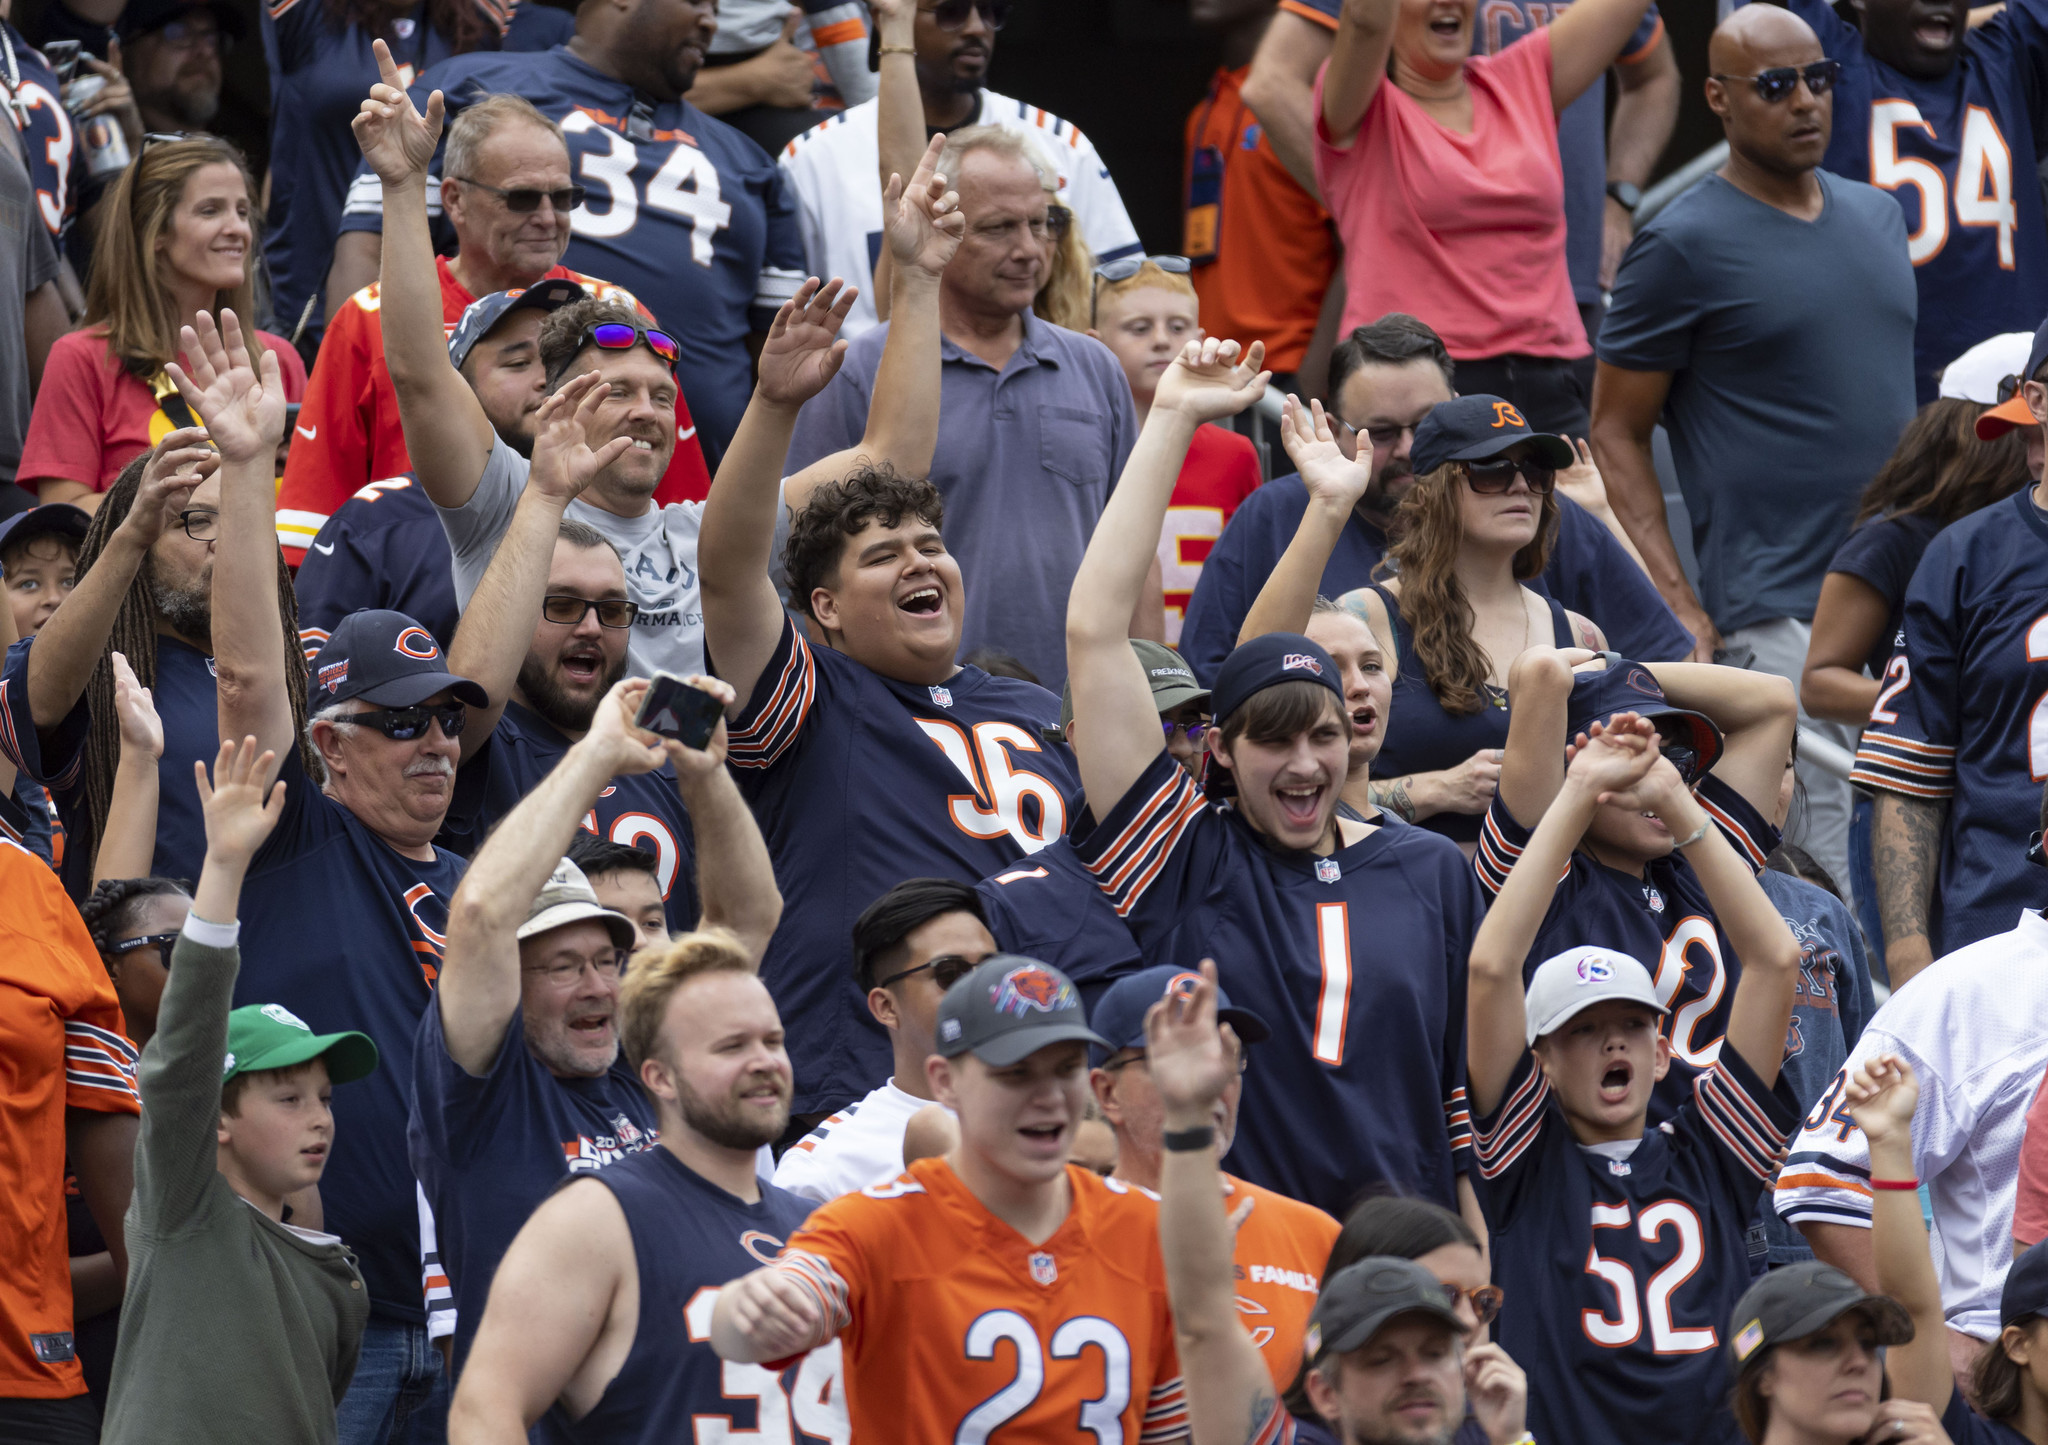 Soldier Field: What to know about Chicago Bears games